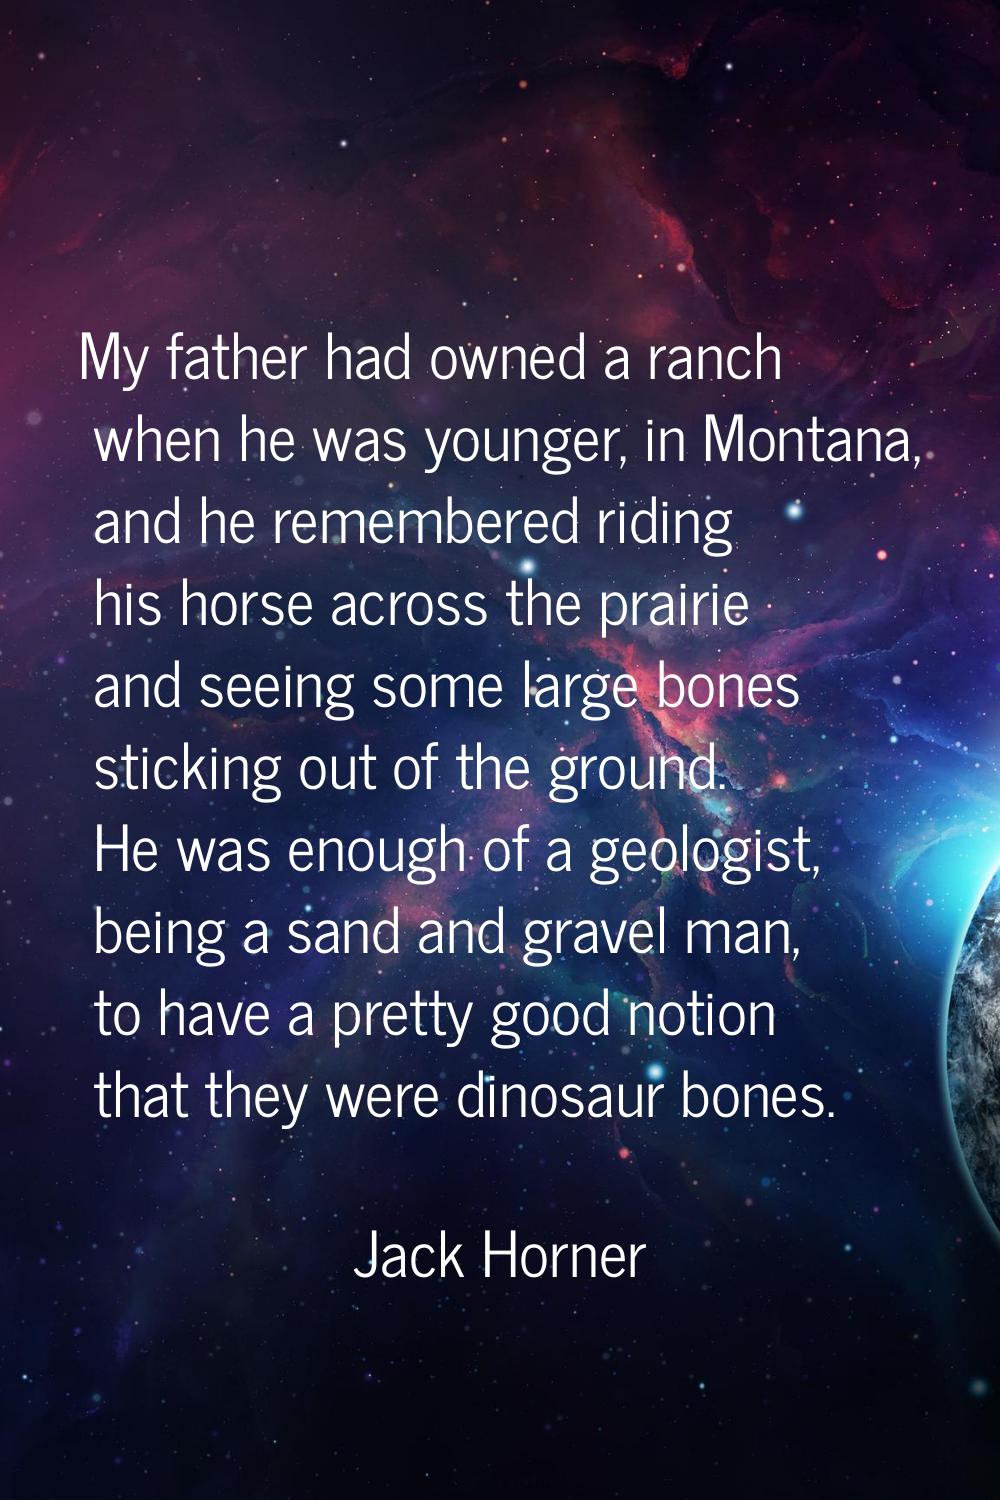 My father had owned a ranch when he was younger, in Montana, and he remembered riding his horse acr